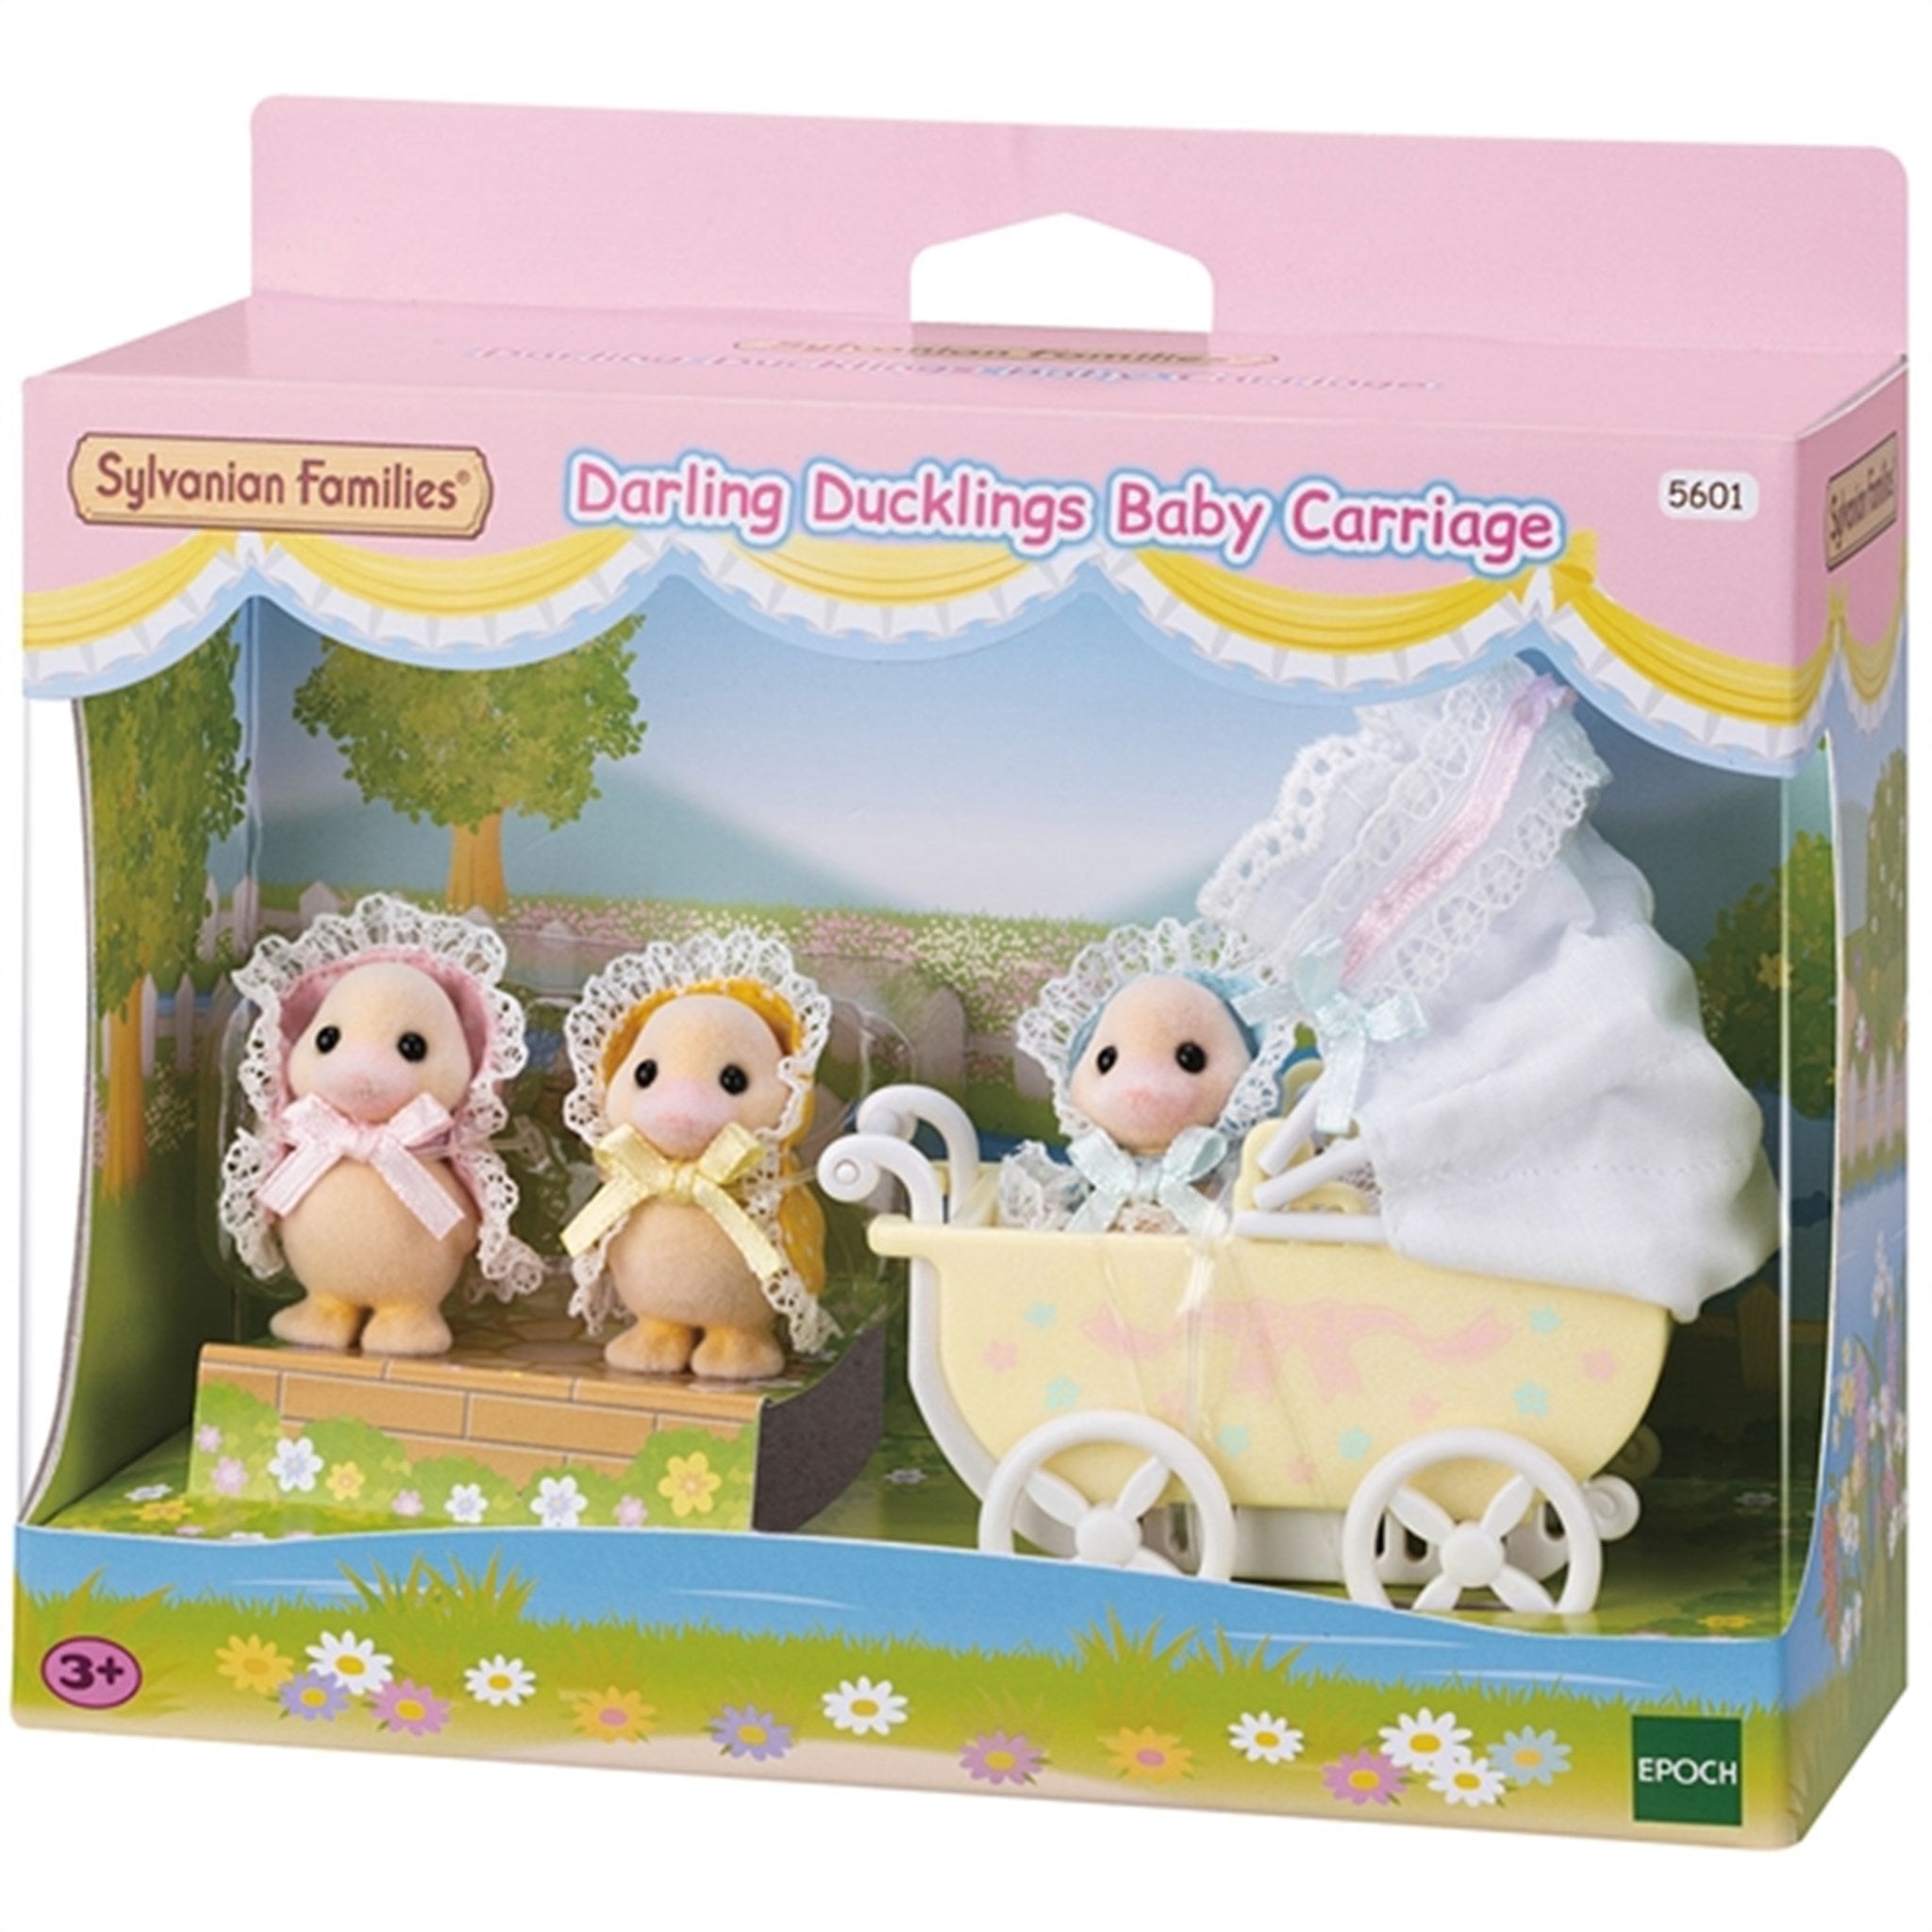 Sylvanian Families® Darling Ducklings Baby Carriage